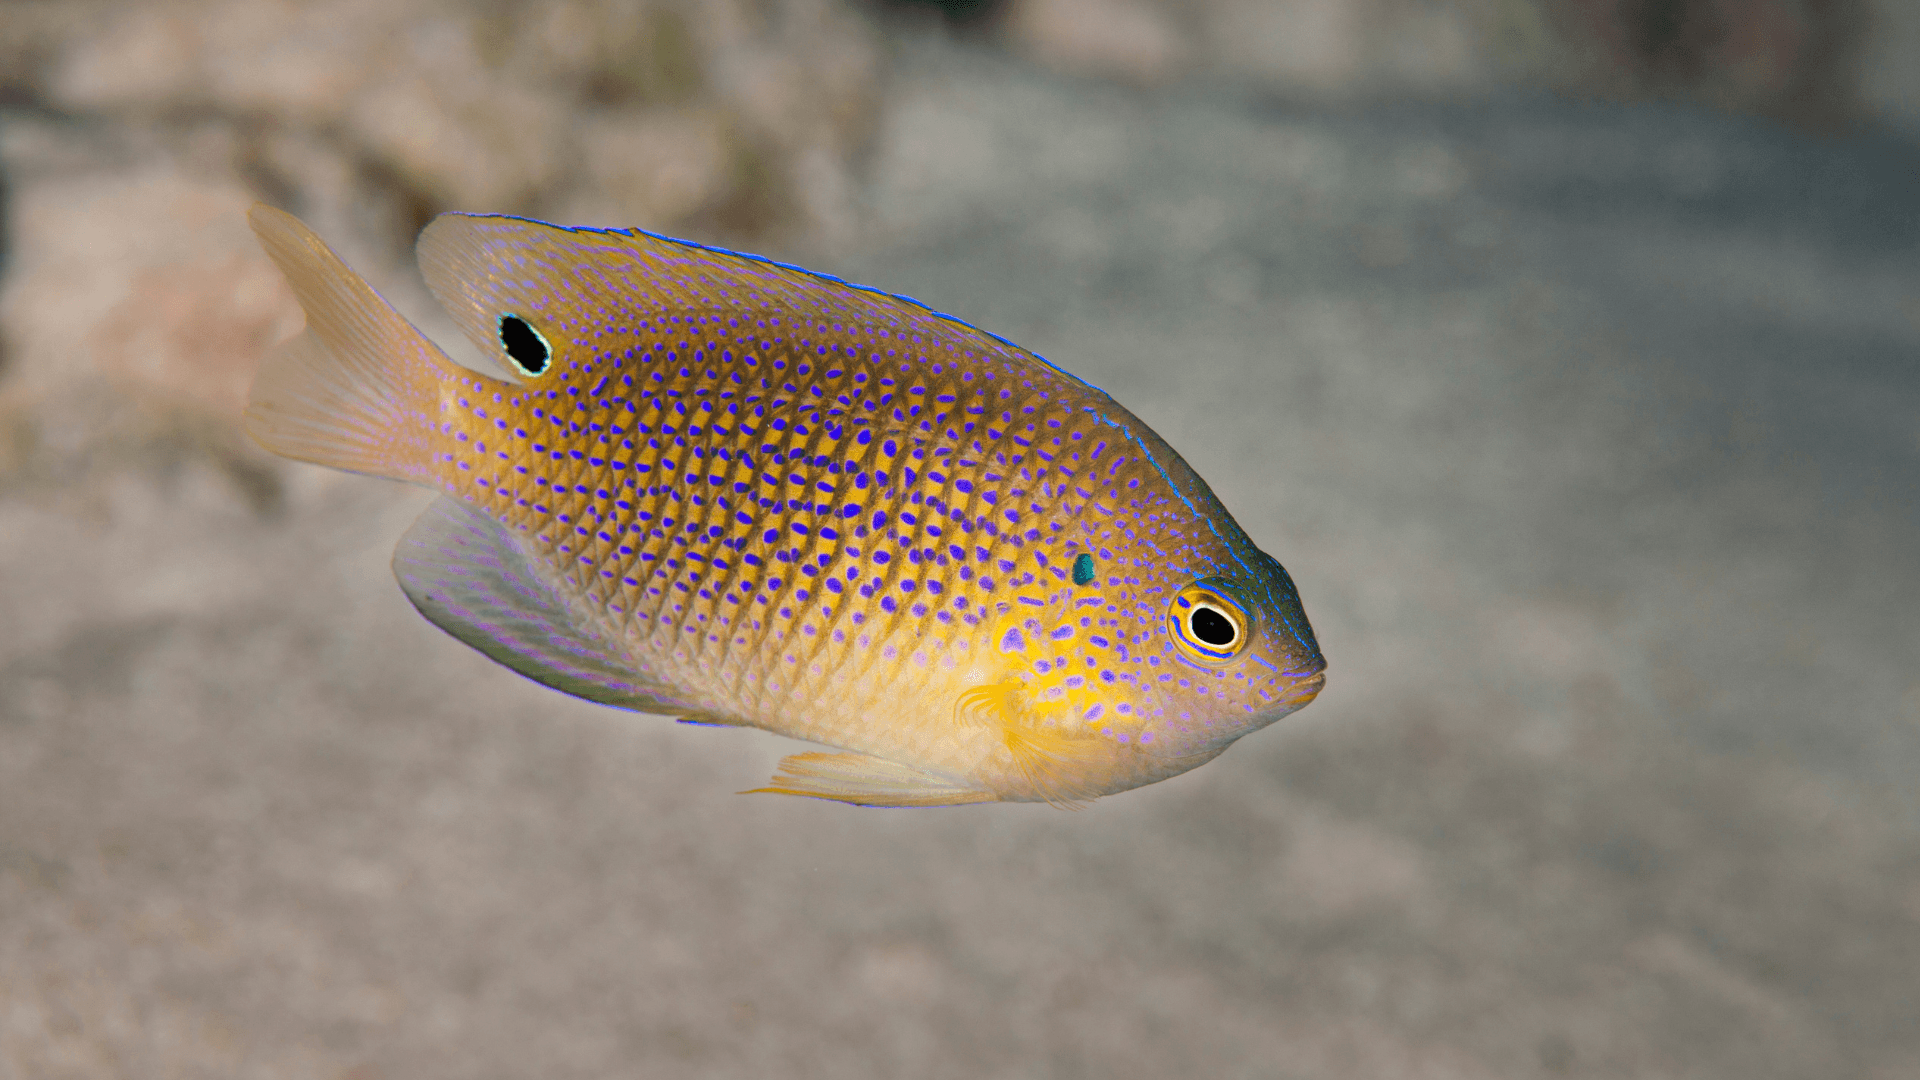 A photo of Ocellate damsel